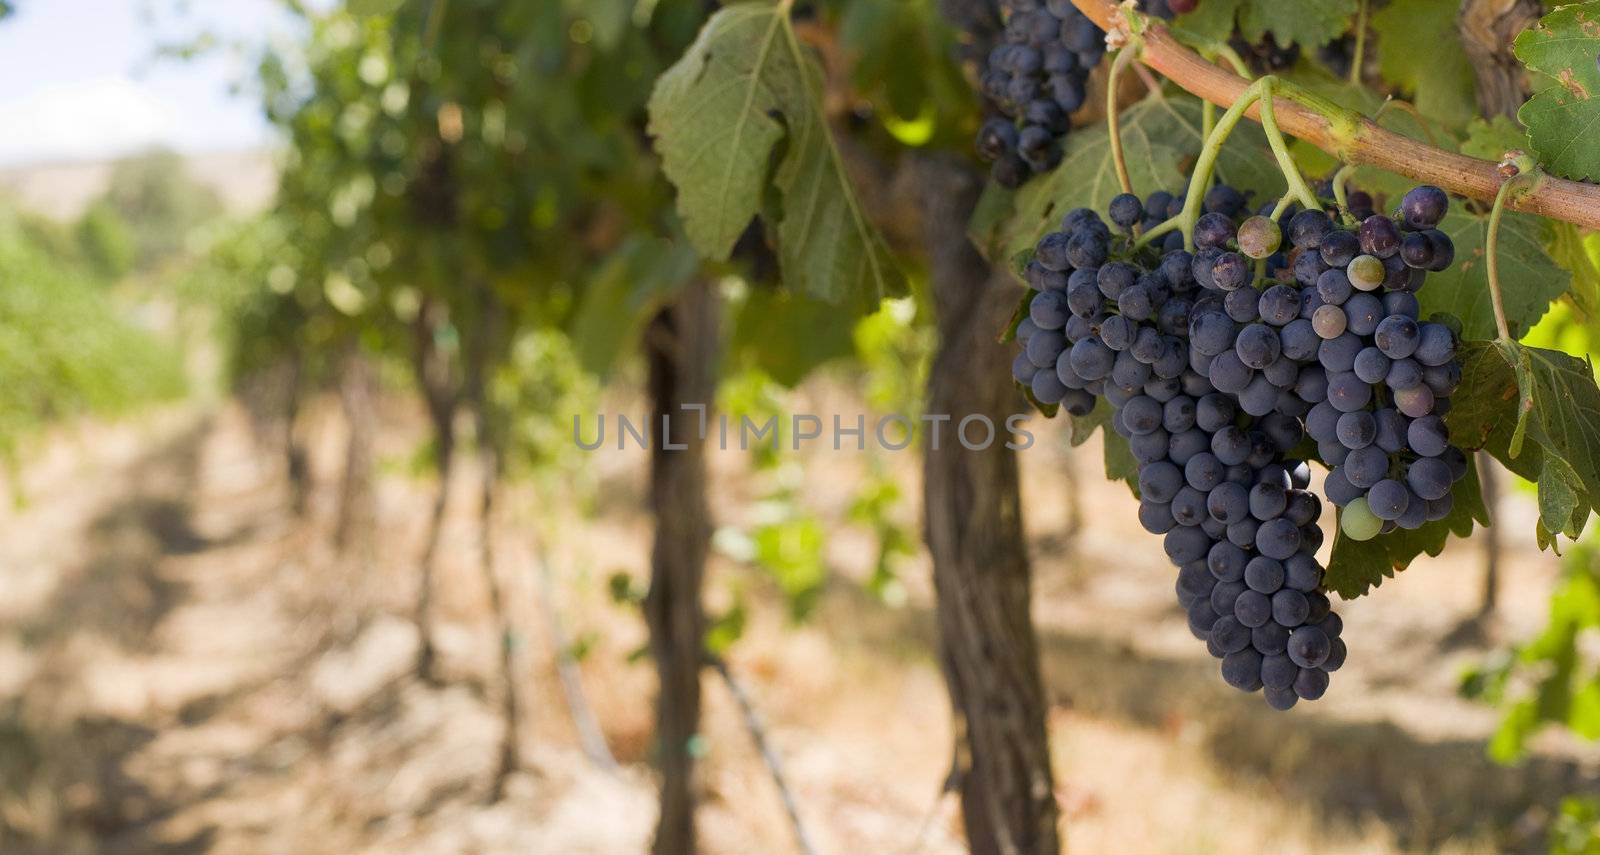 Grapes on the Vine by ChrisBoswell